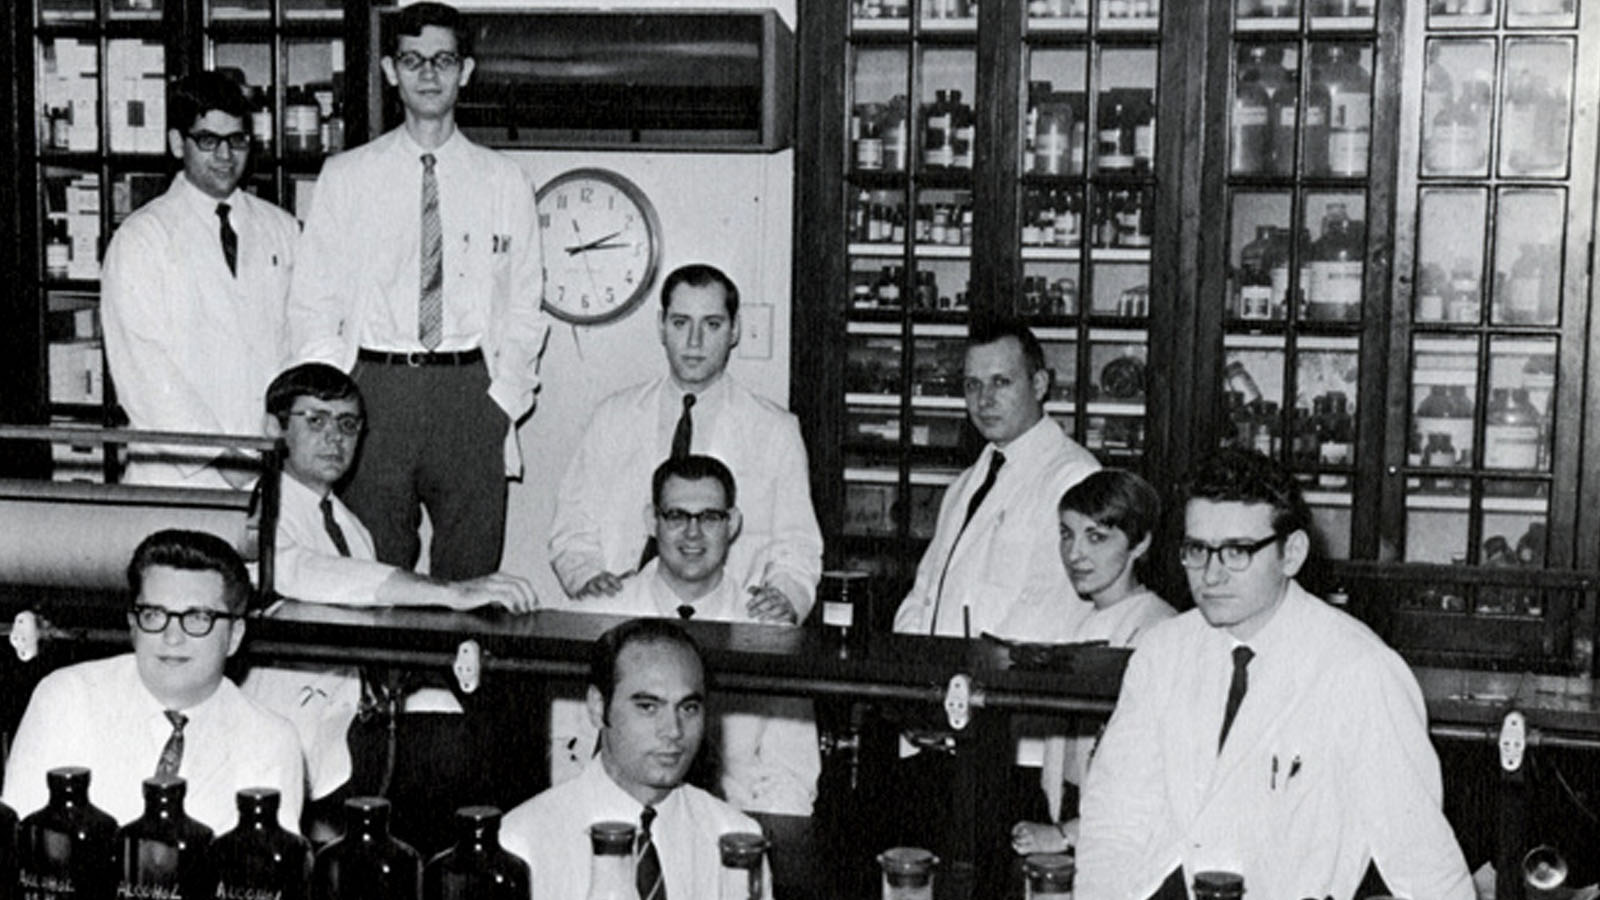 PCOM students posing in a research lab in the 1950s